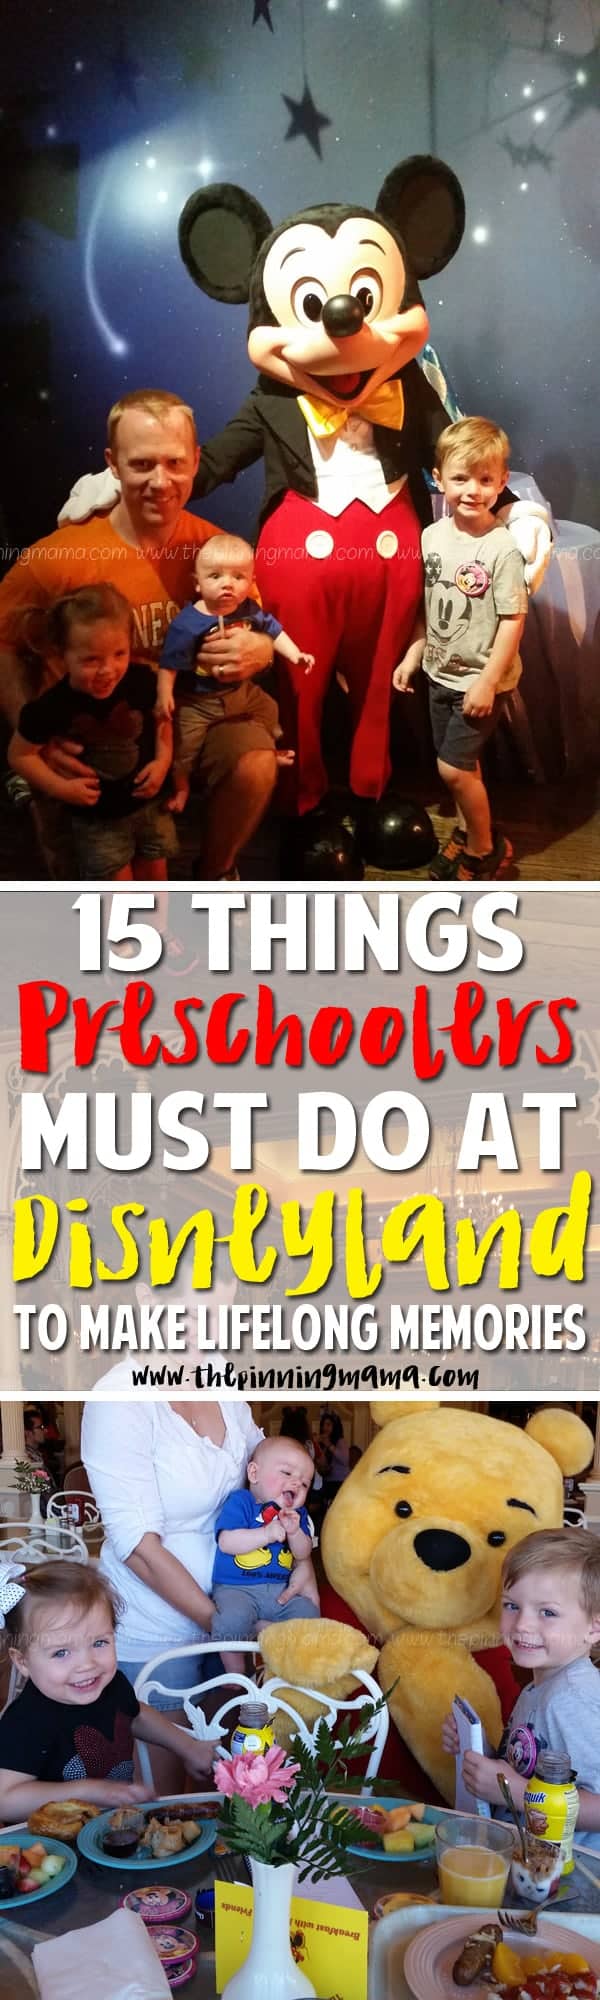 Ideas for traditions, experiences, and how to make memories at Disneyland! This list is packed full of BRILLIANT and original ideas!! Did you read number 9? We are totally doing it every time we go!